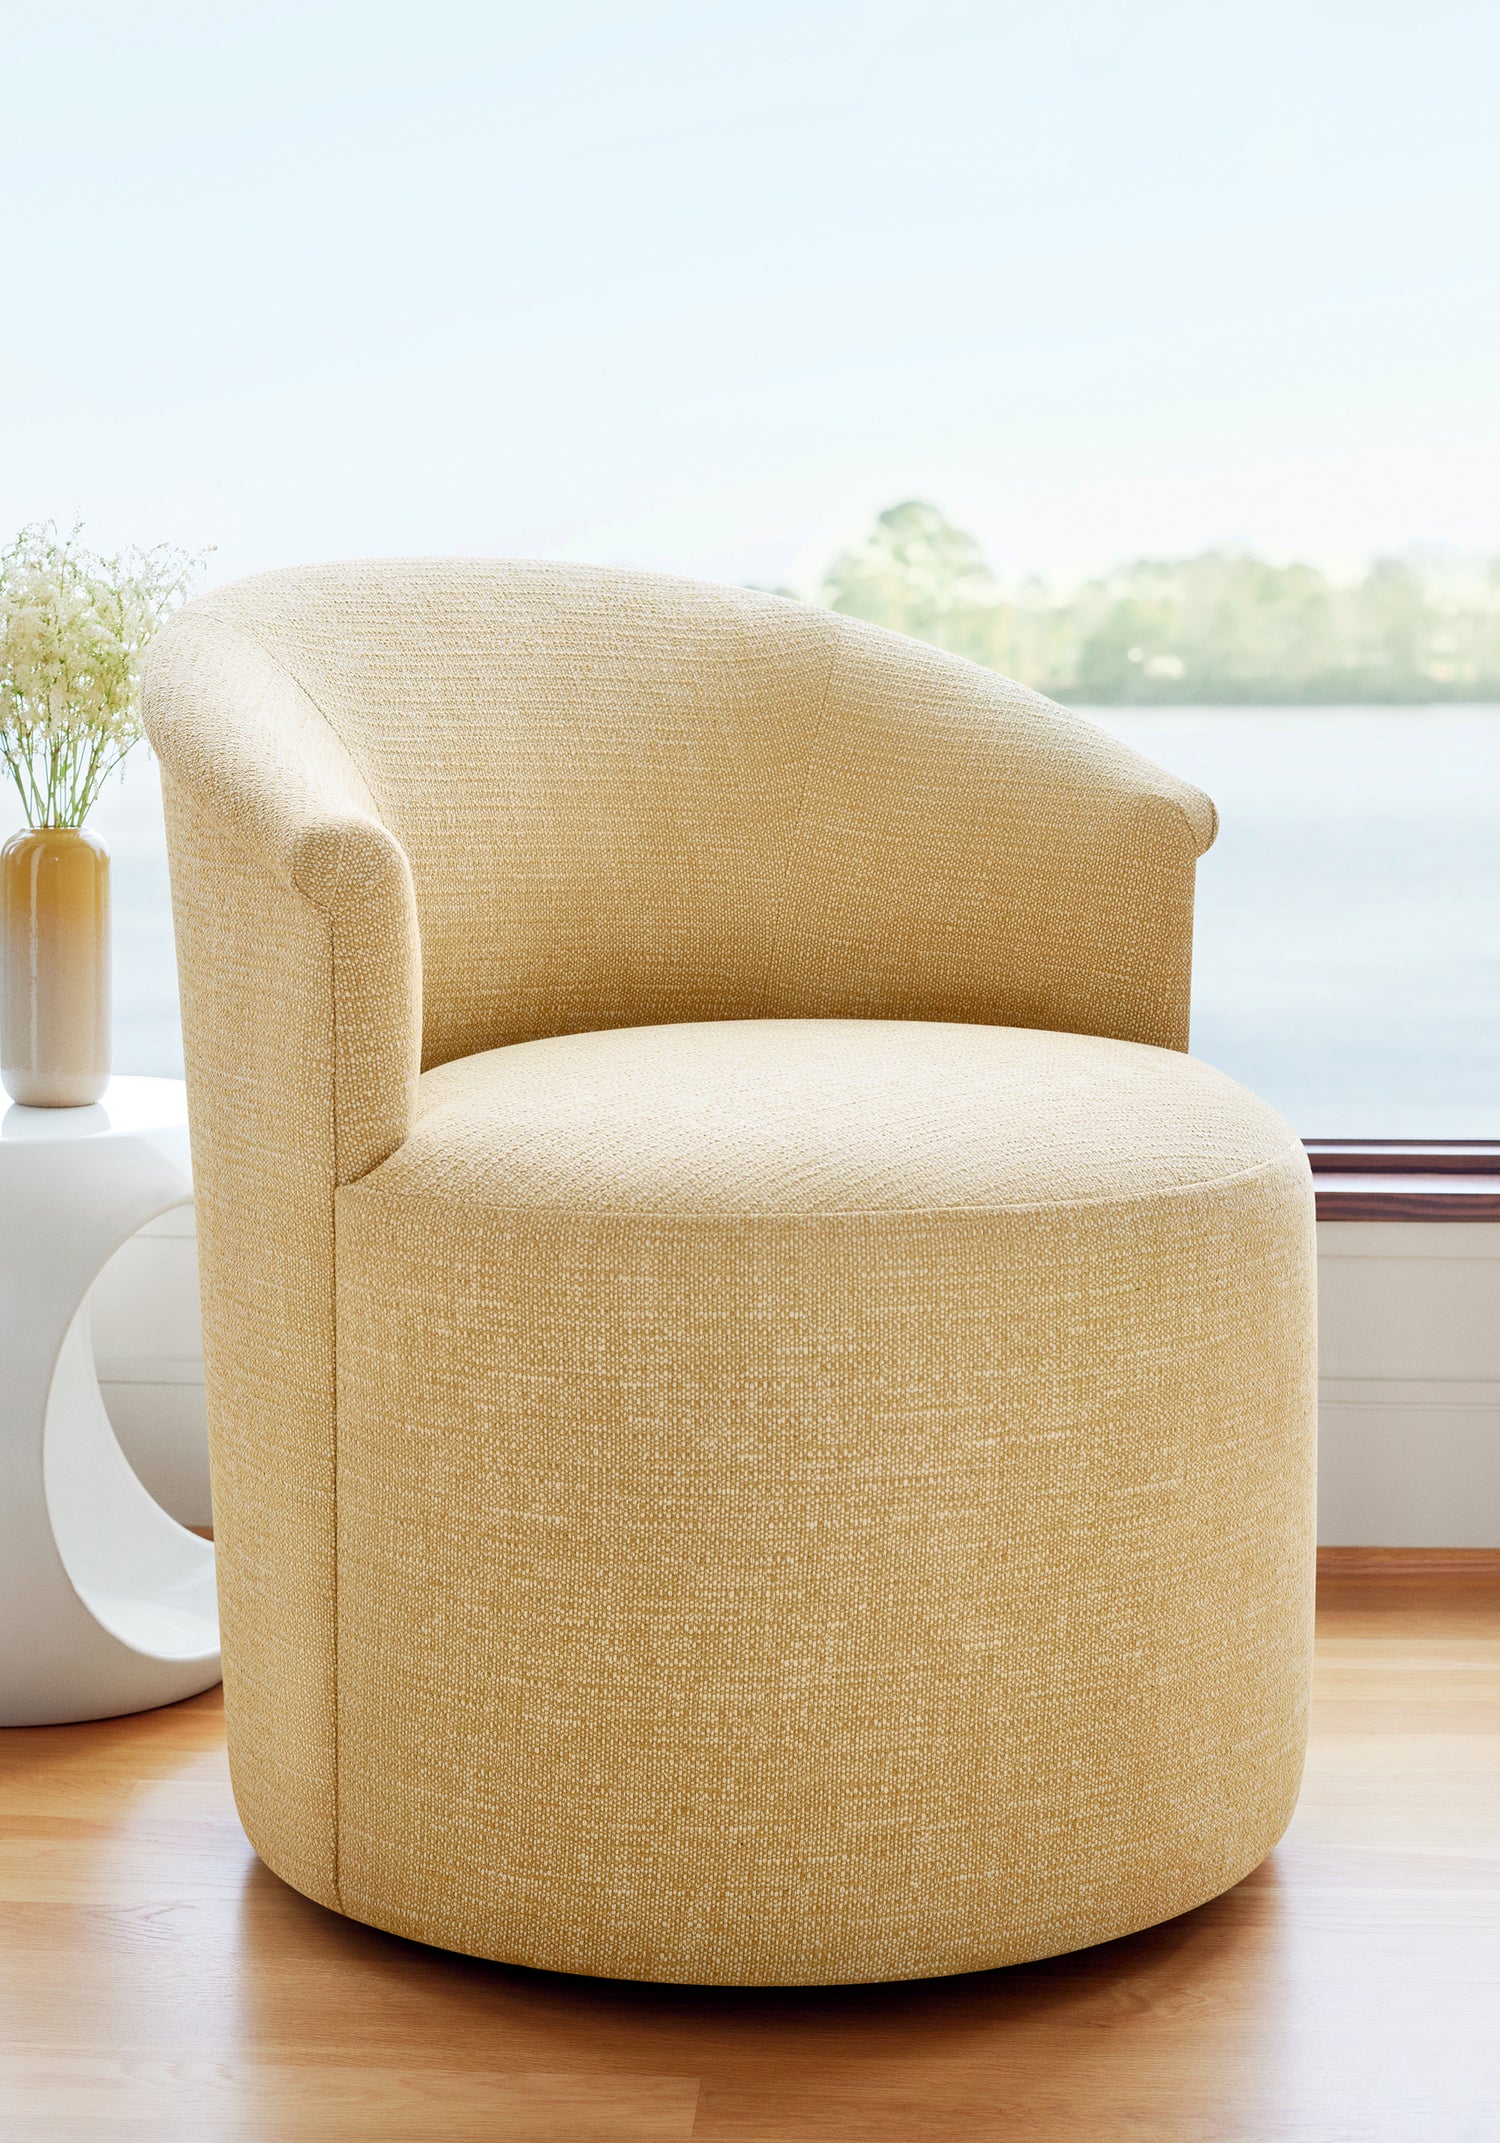 Chair featuring Petra fabric in straw color - pattern number W8738 - by Thibaut in the Haven Textures collection